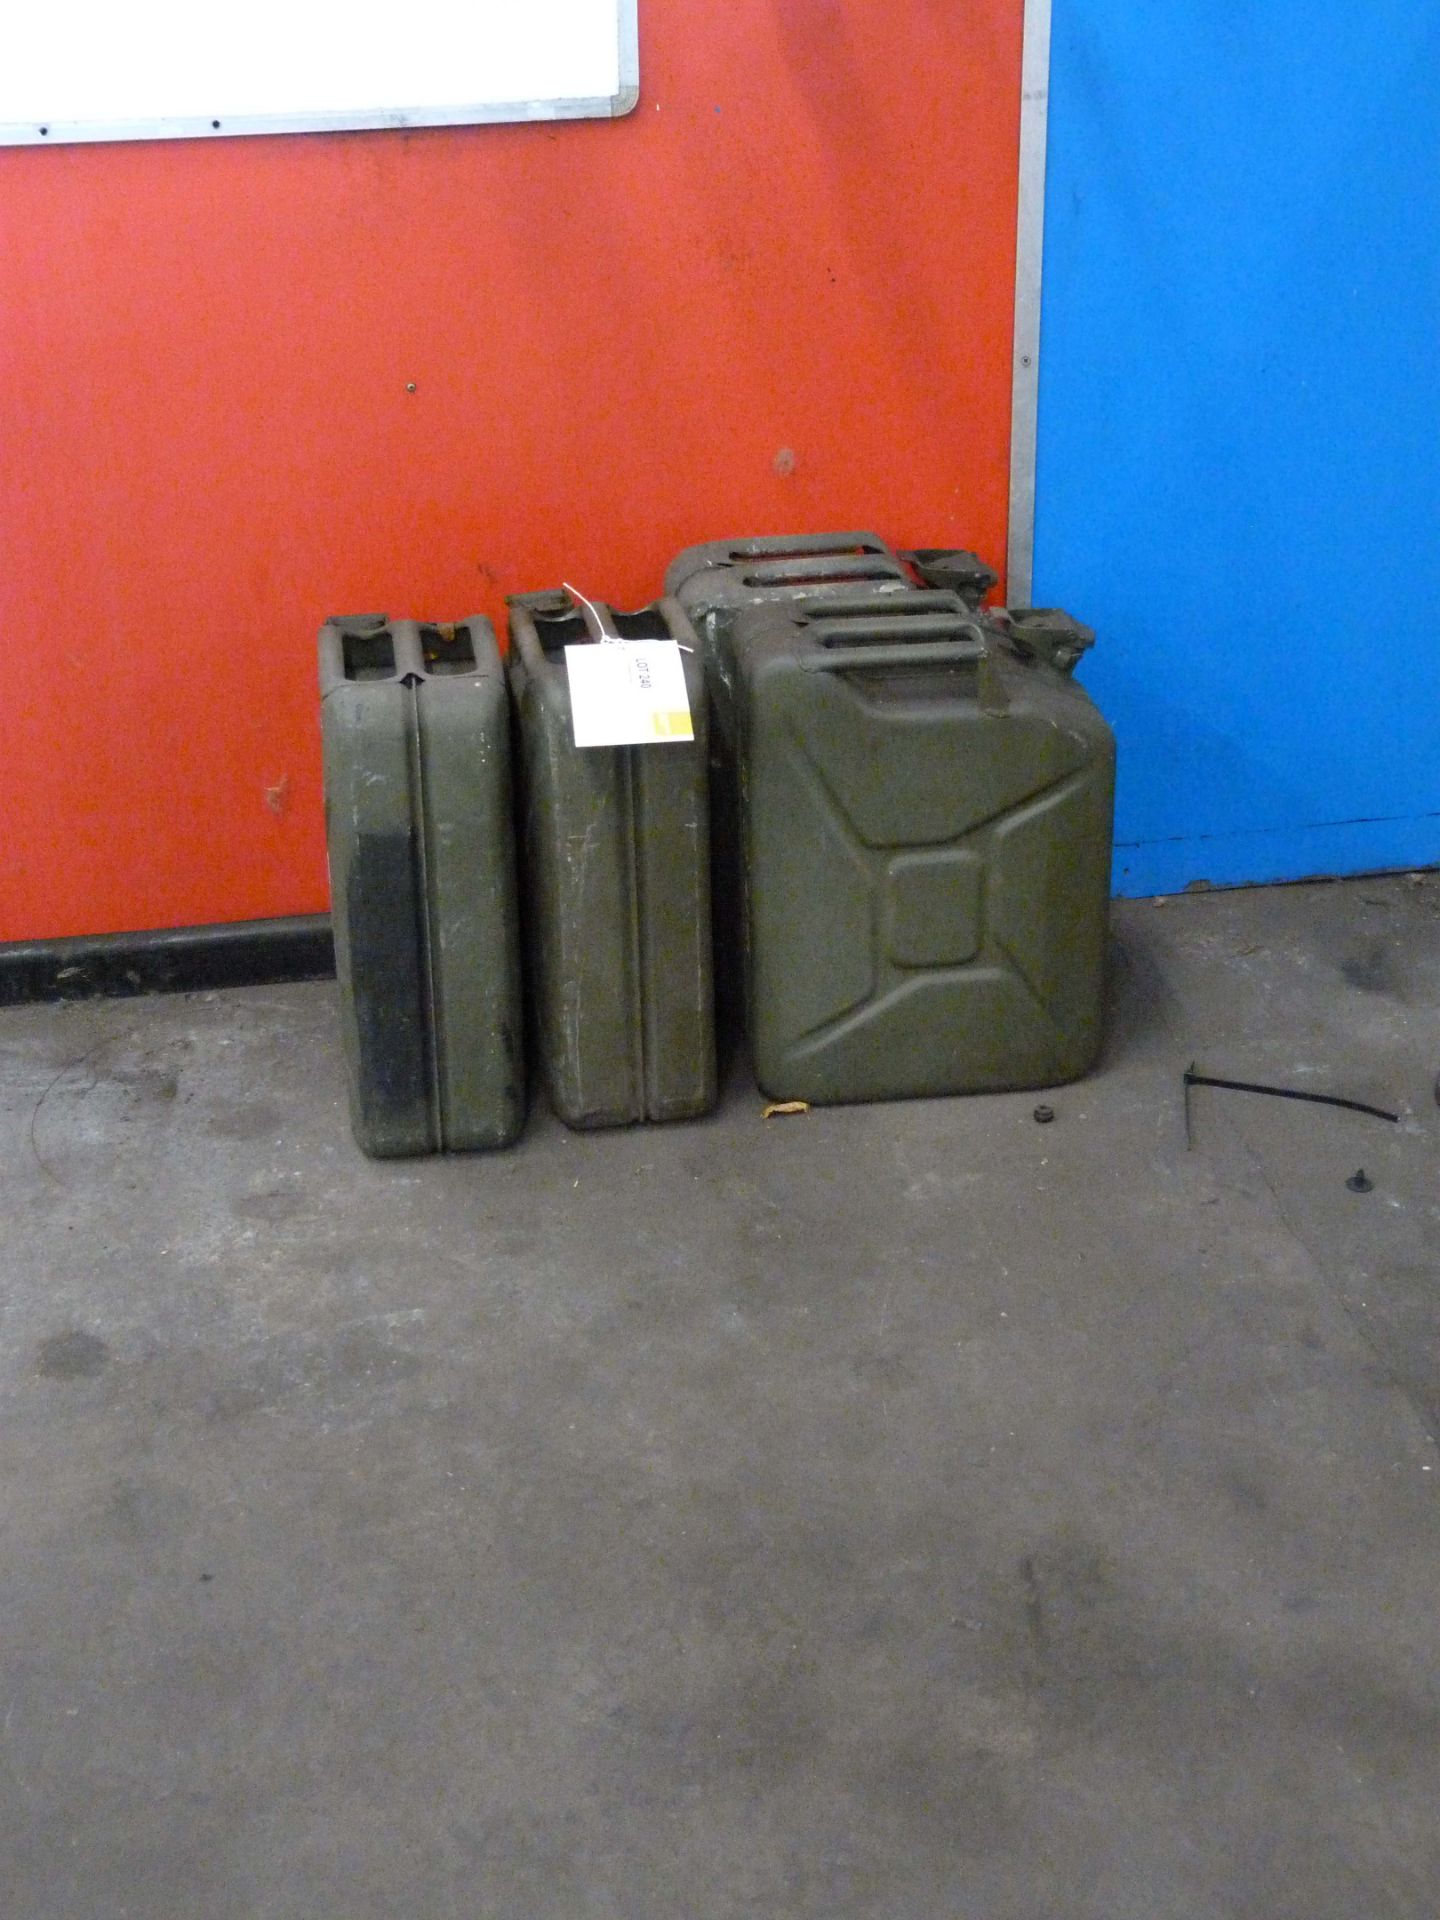 4 Jerry cans with contents